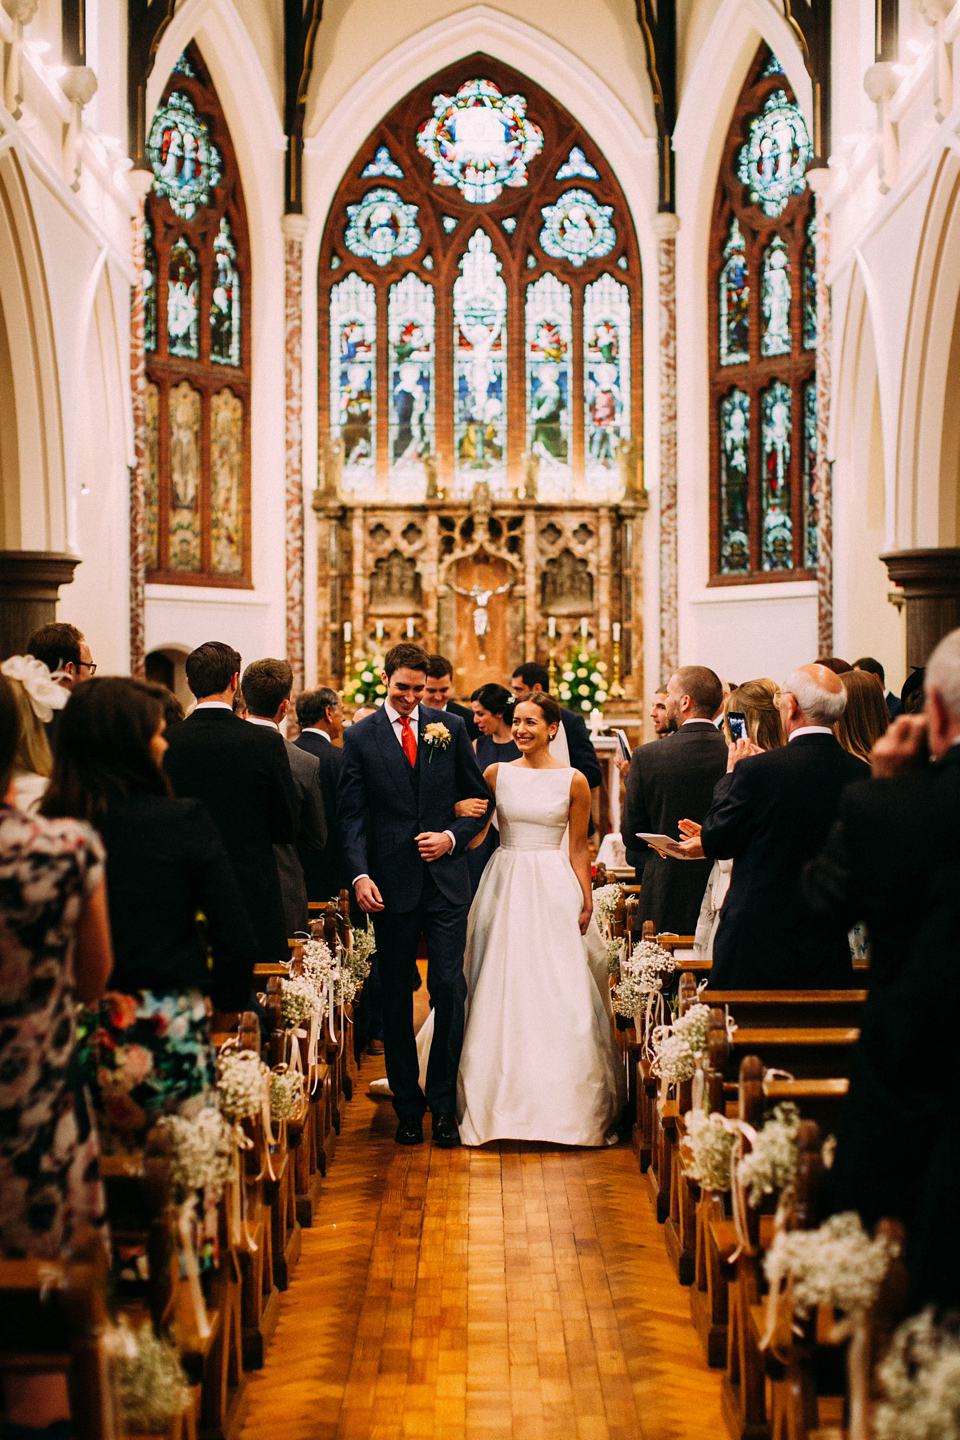 Bride Jo wore a Caroline Castigliano gown with pockets - a purchase from Agapé Bridal Boutique. Photography by The Lawsons.